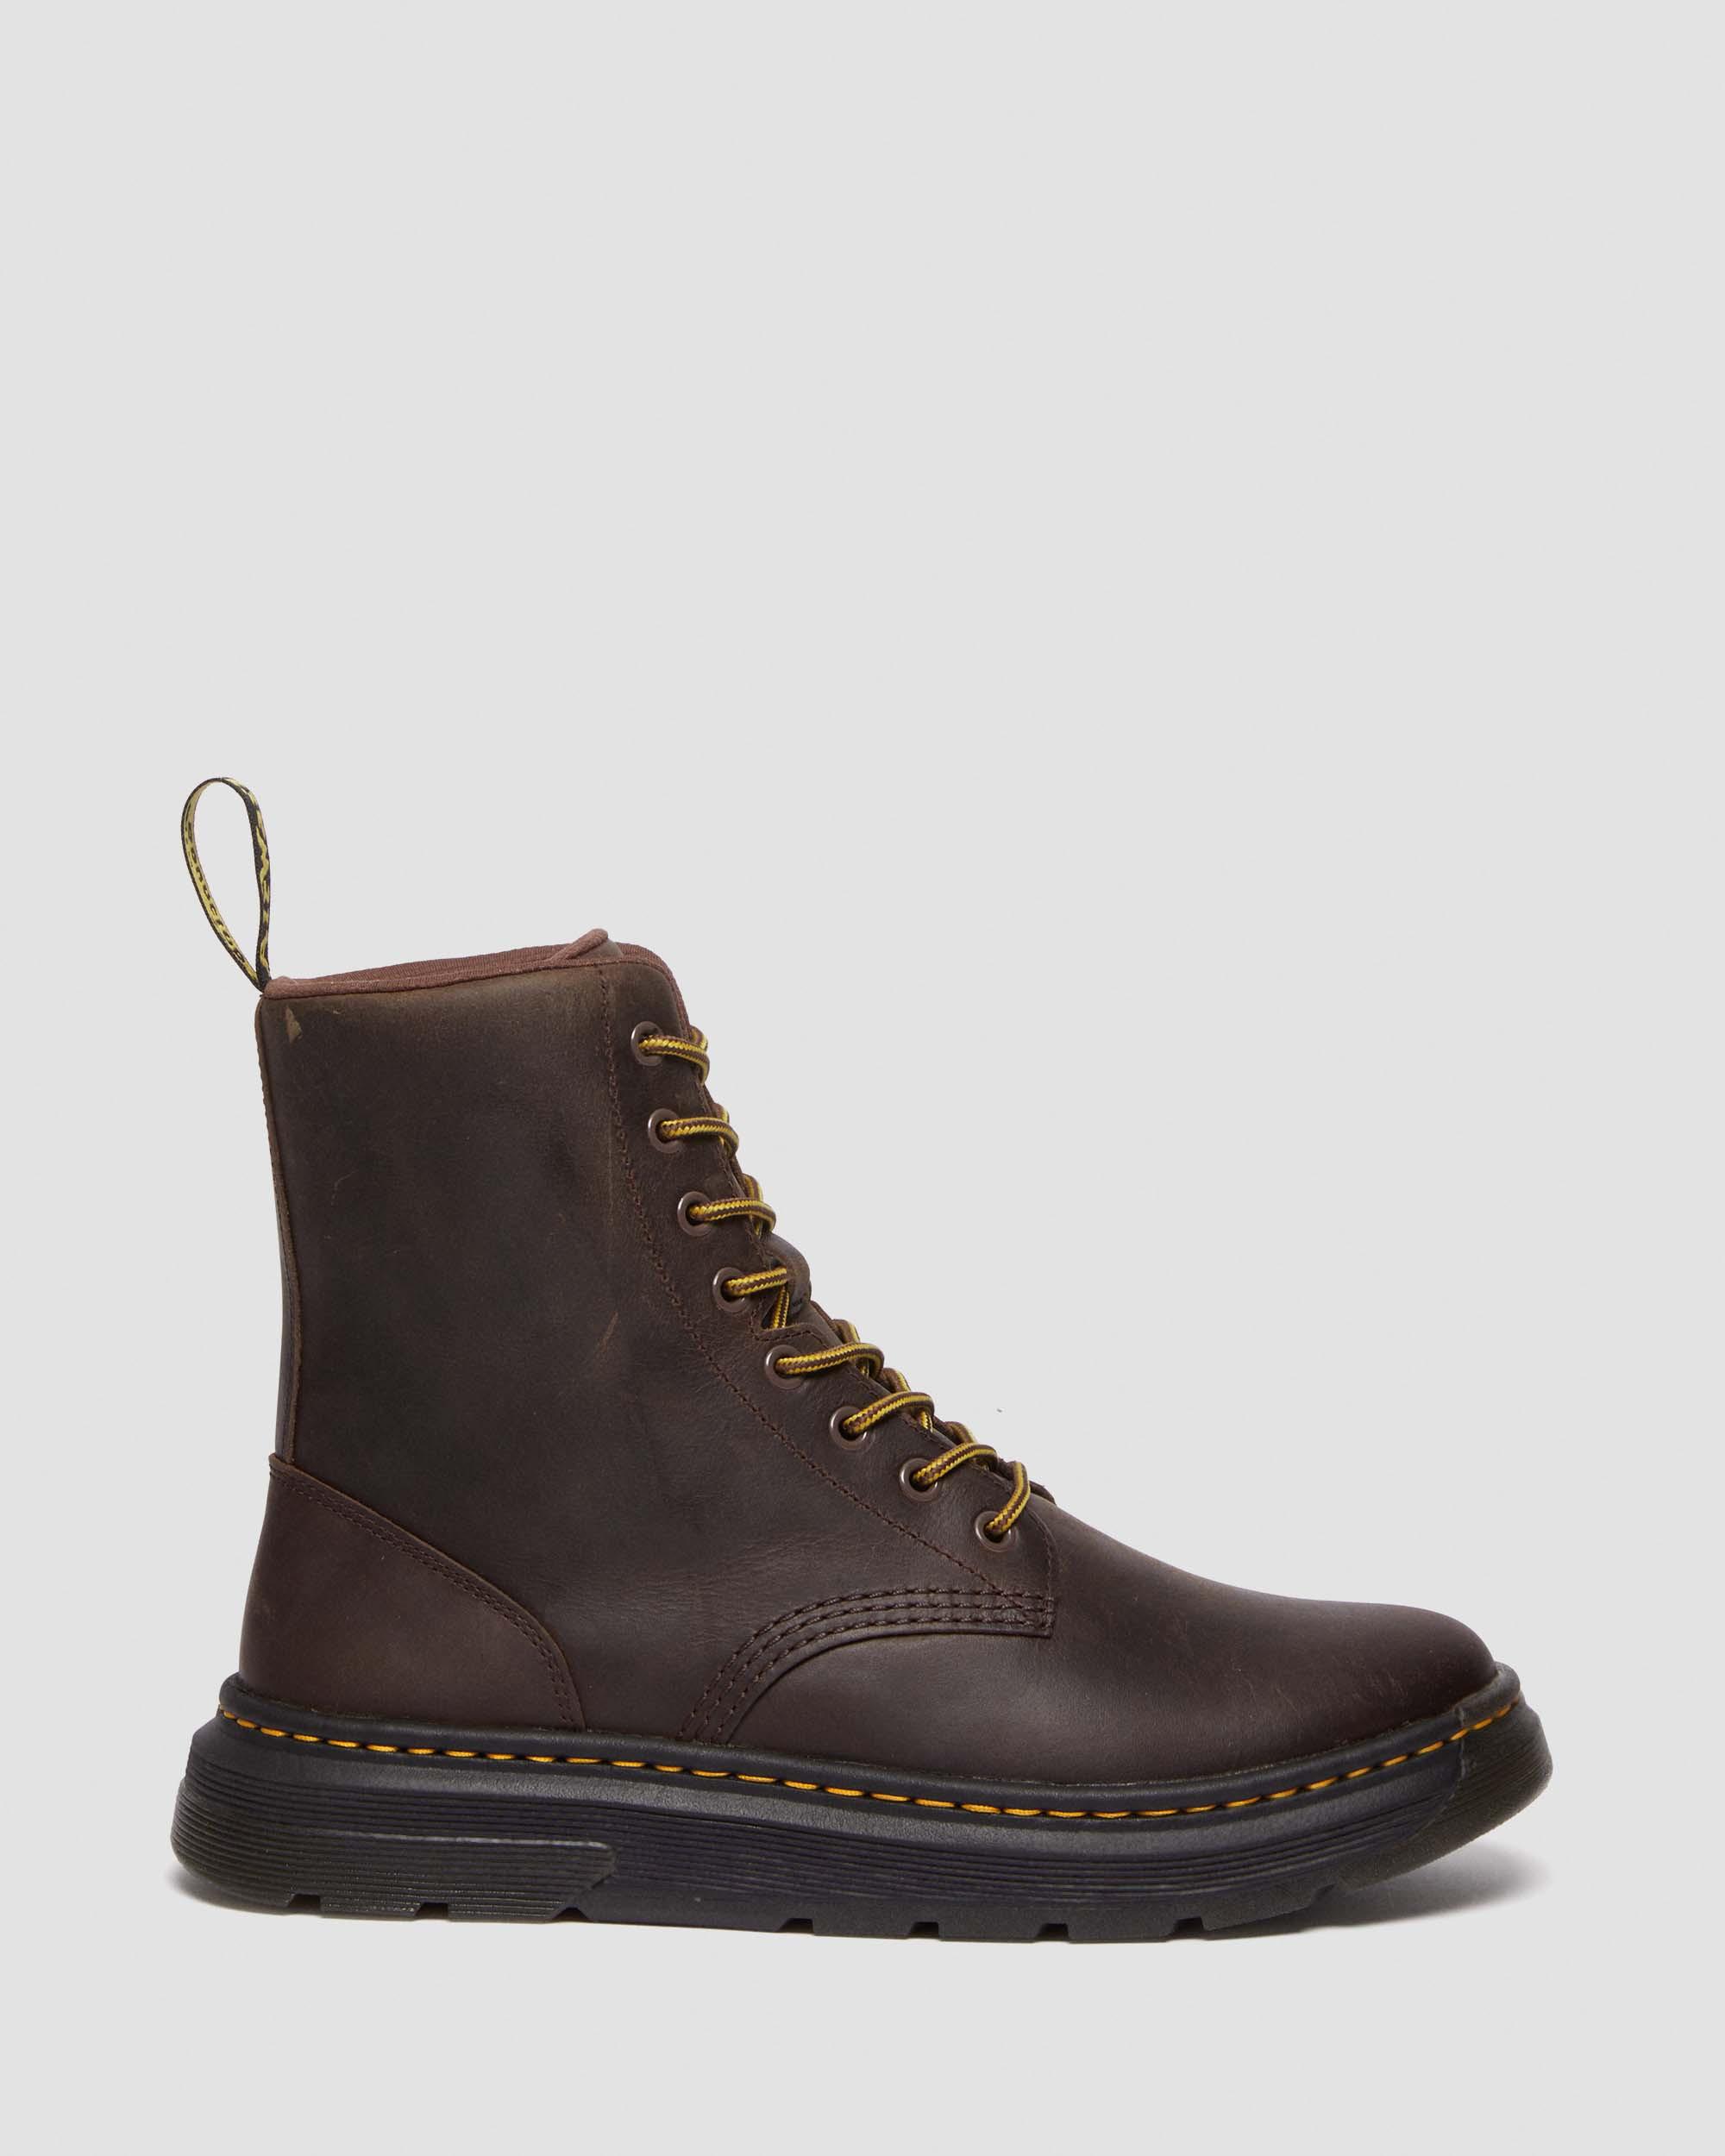 Crewson Leather Lace Up Boots in Dark Brown | Dr. Martens